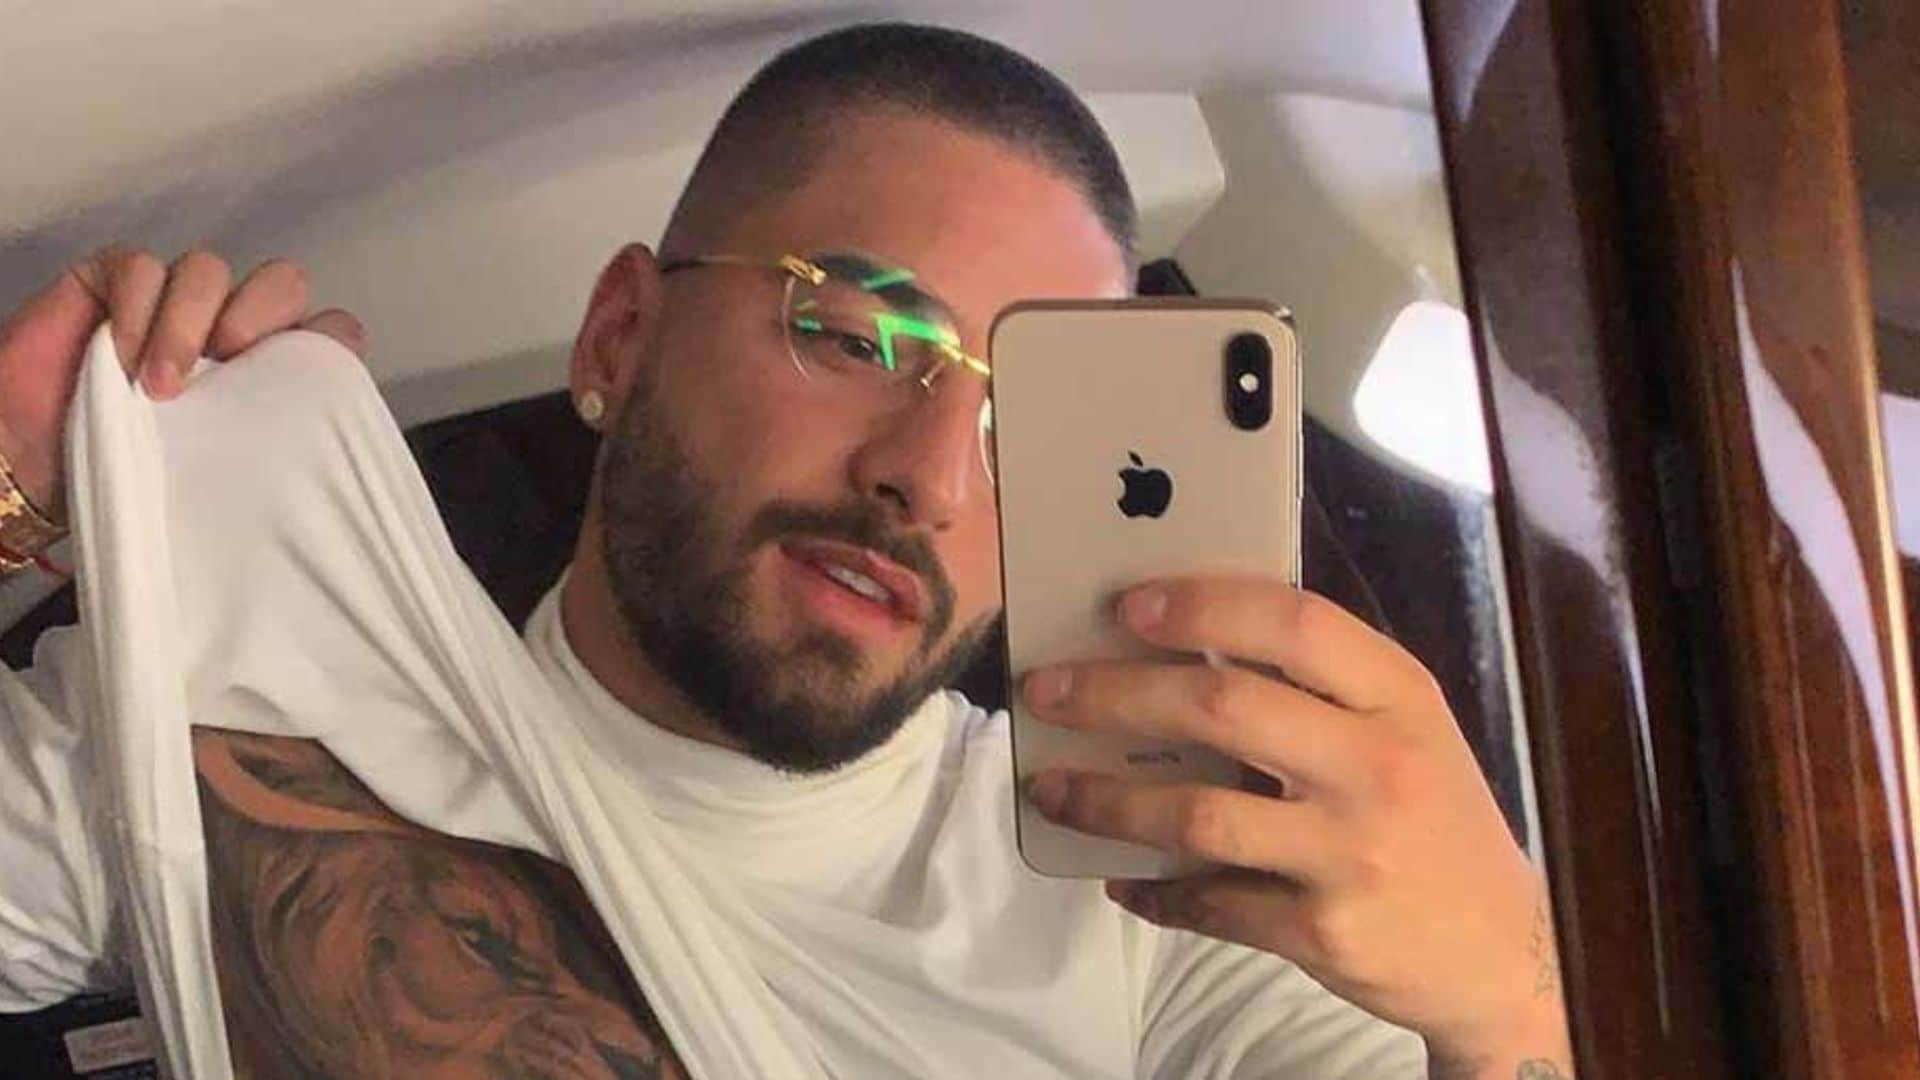 Flaquito season: Maluma shares the results from his 12-day body transformation